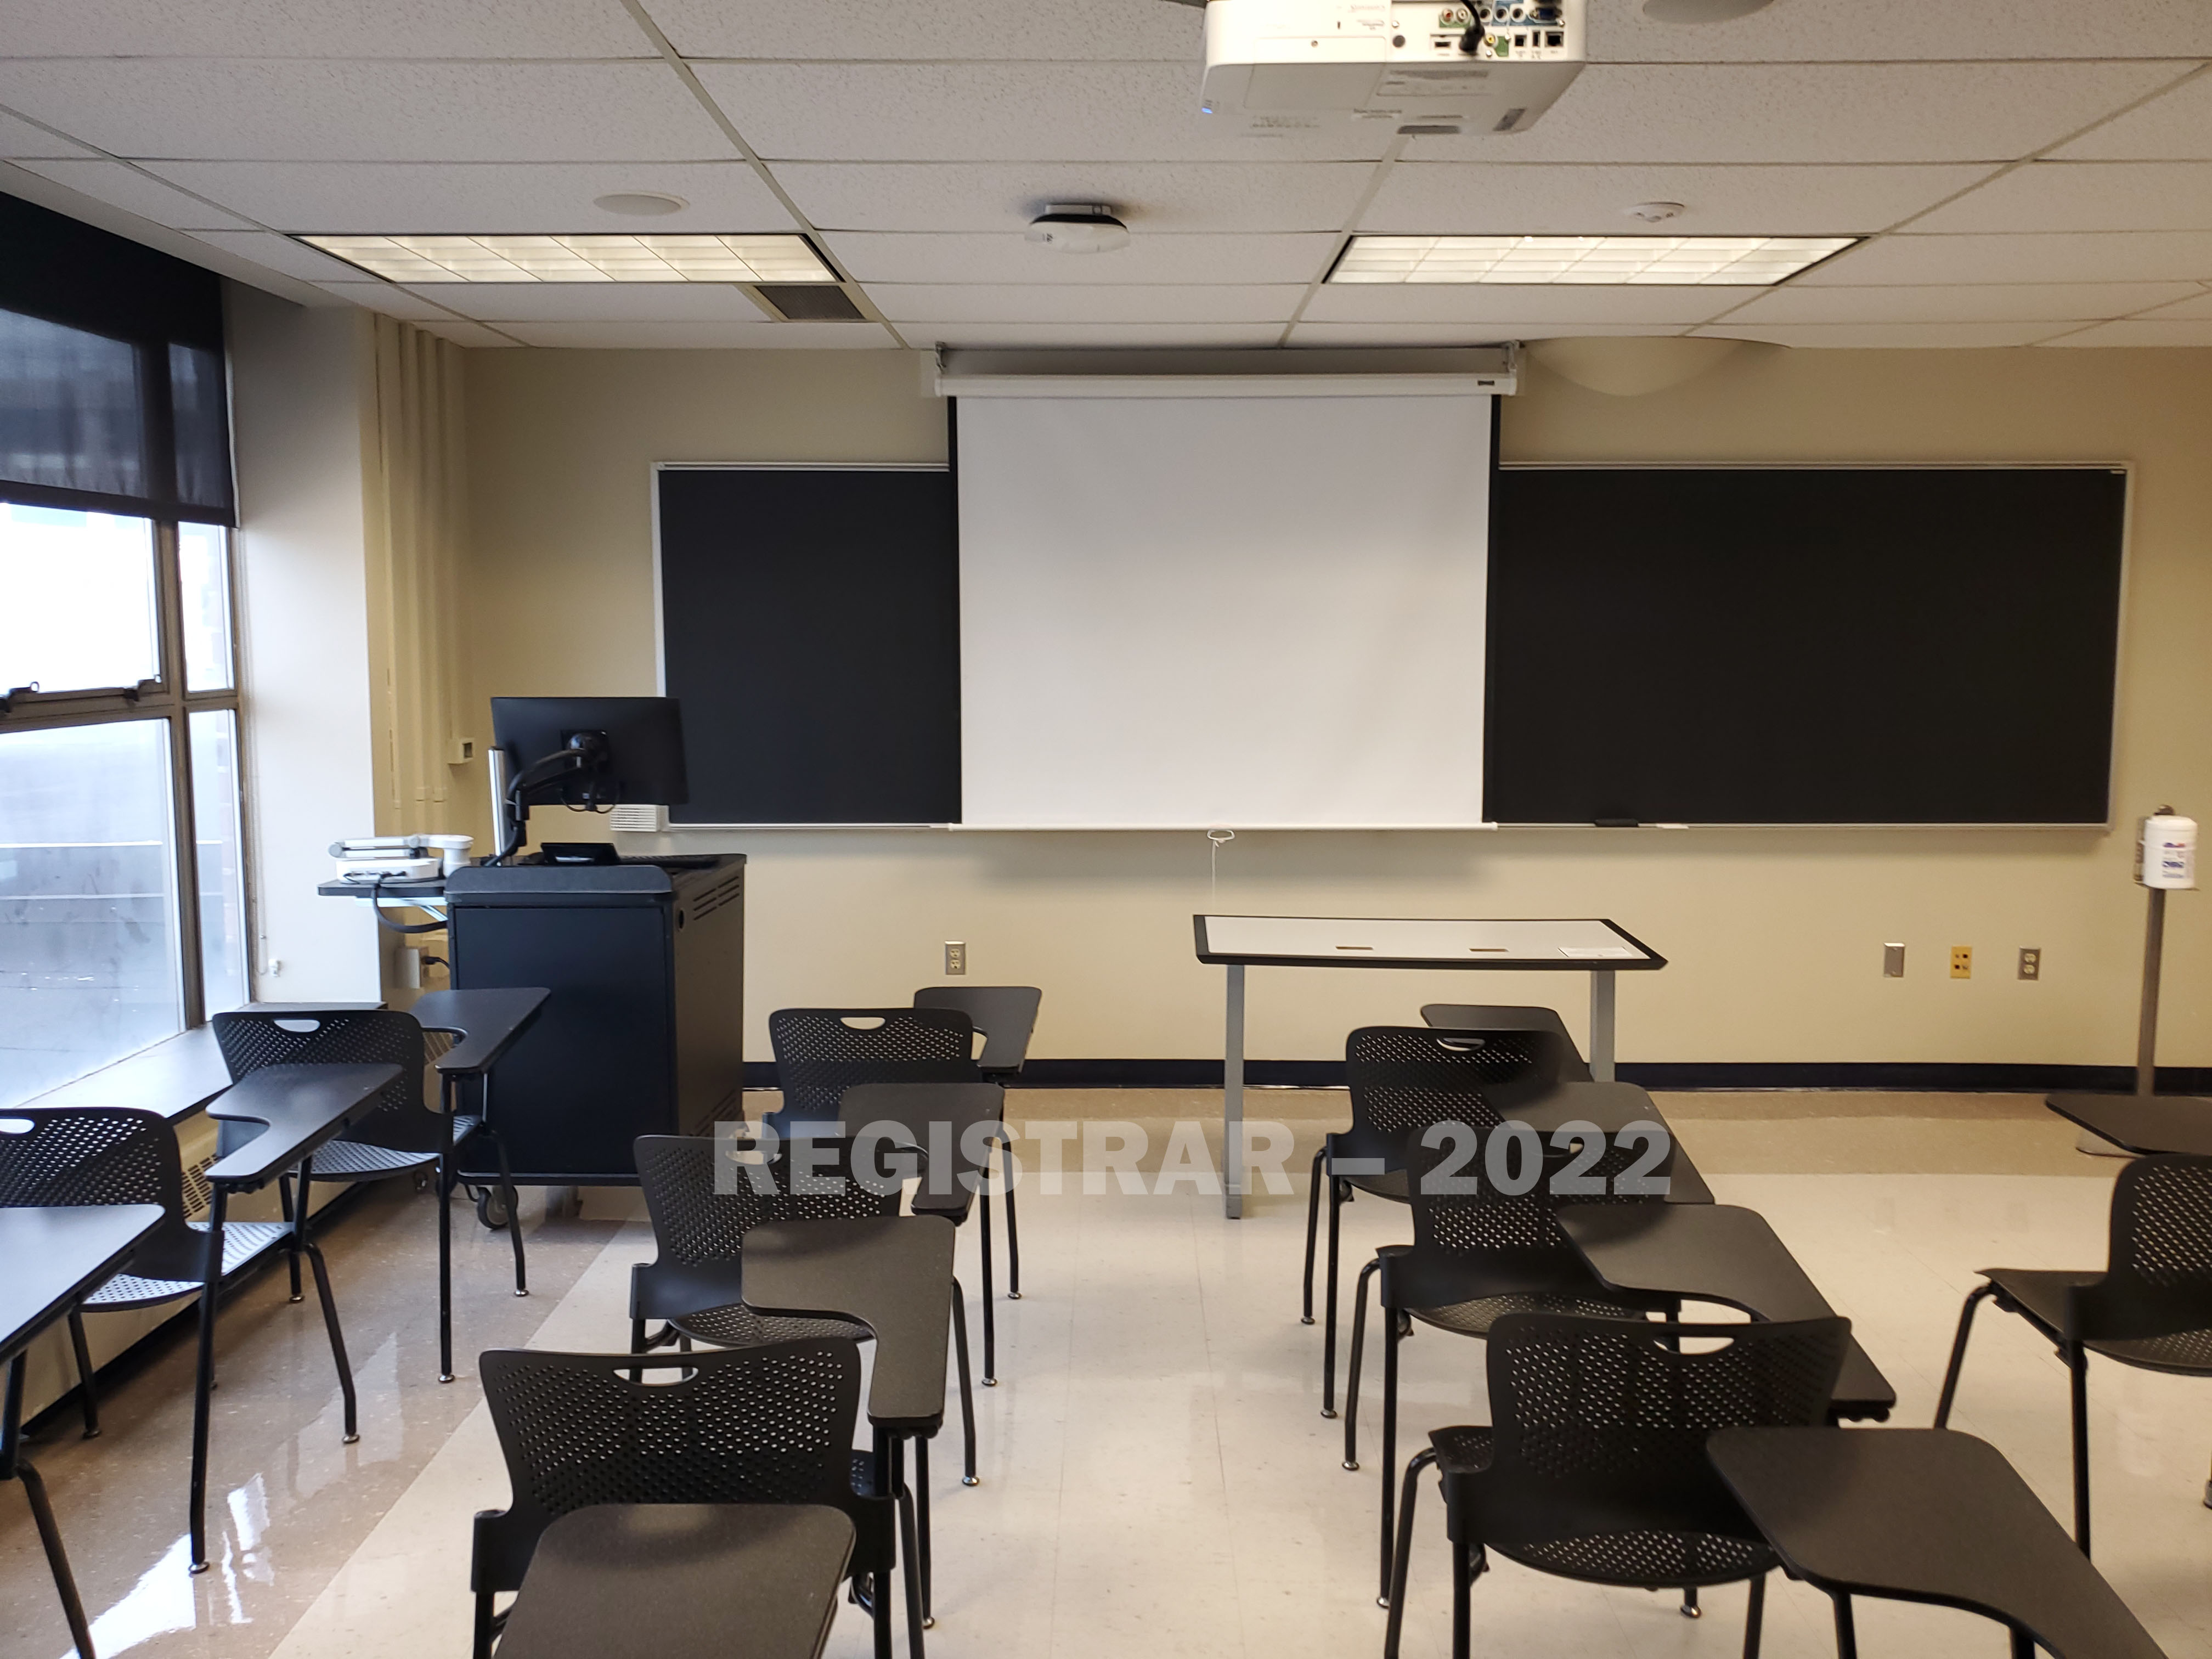 Enarson Classroom Building room 248 view from the back of the room with projector screen down